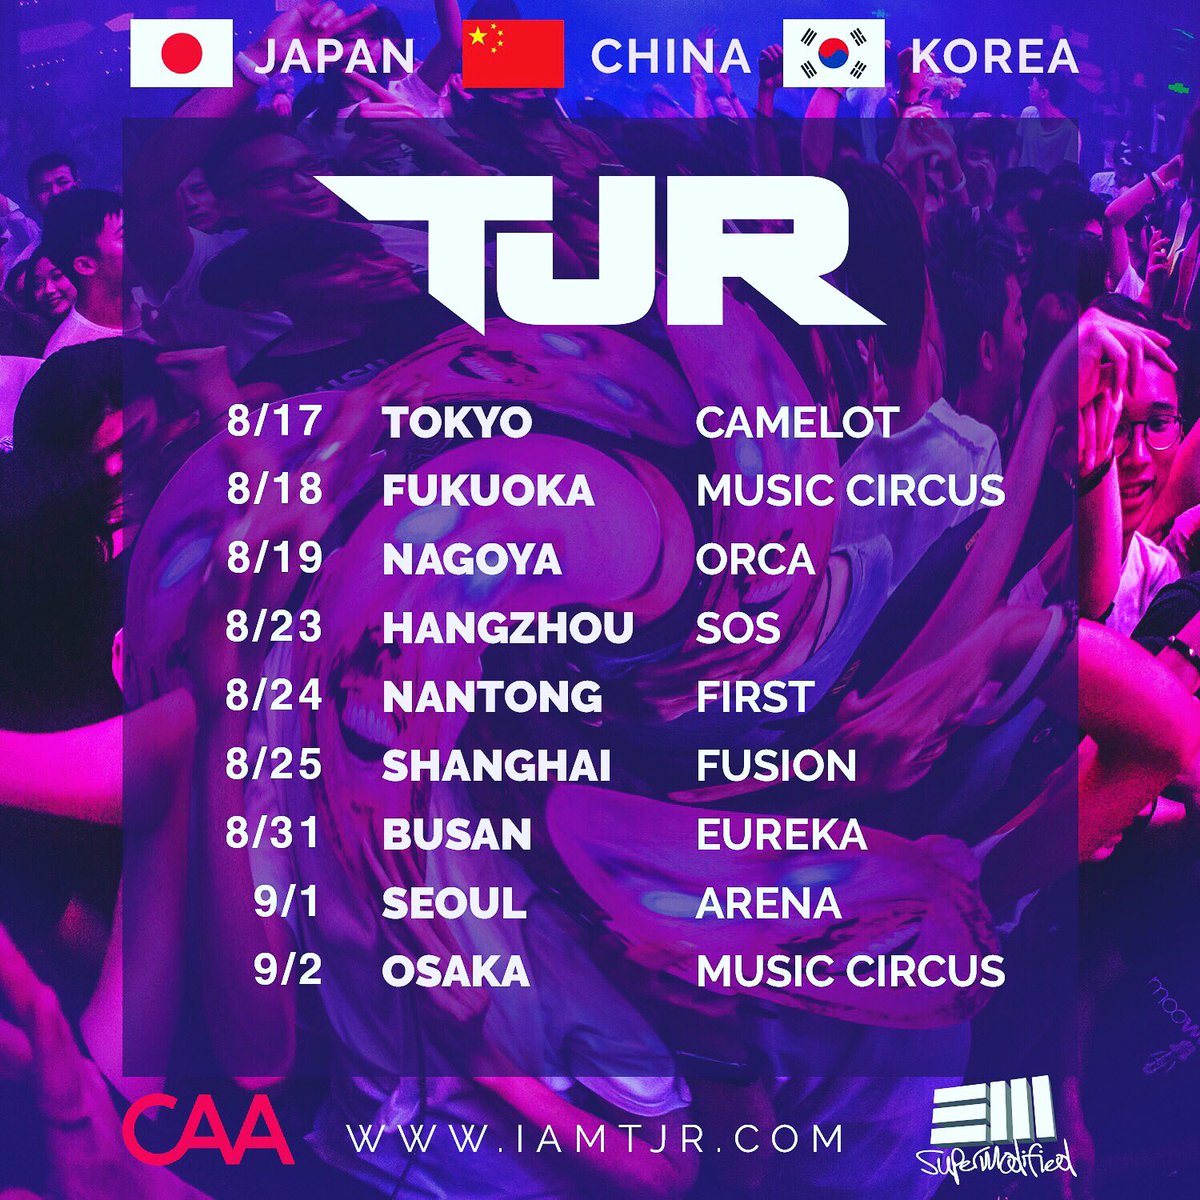 Asia tour begins this week 😀 https://t.co/YVCZCrbuCO